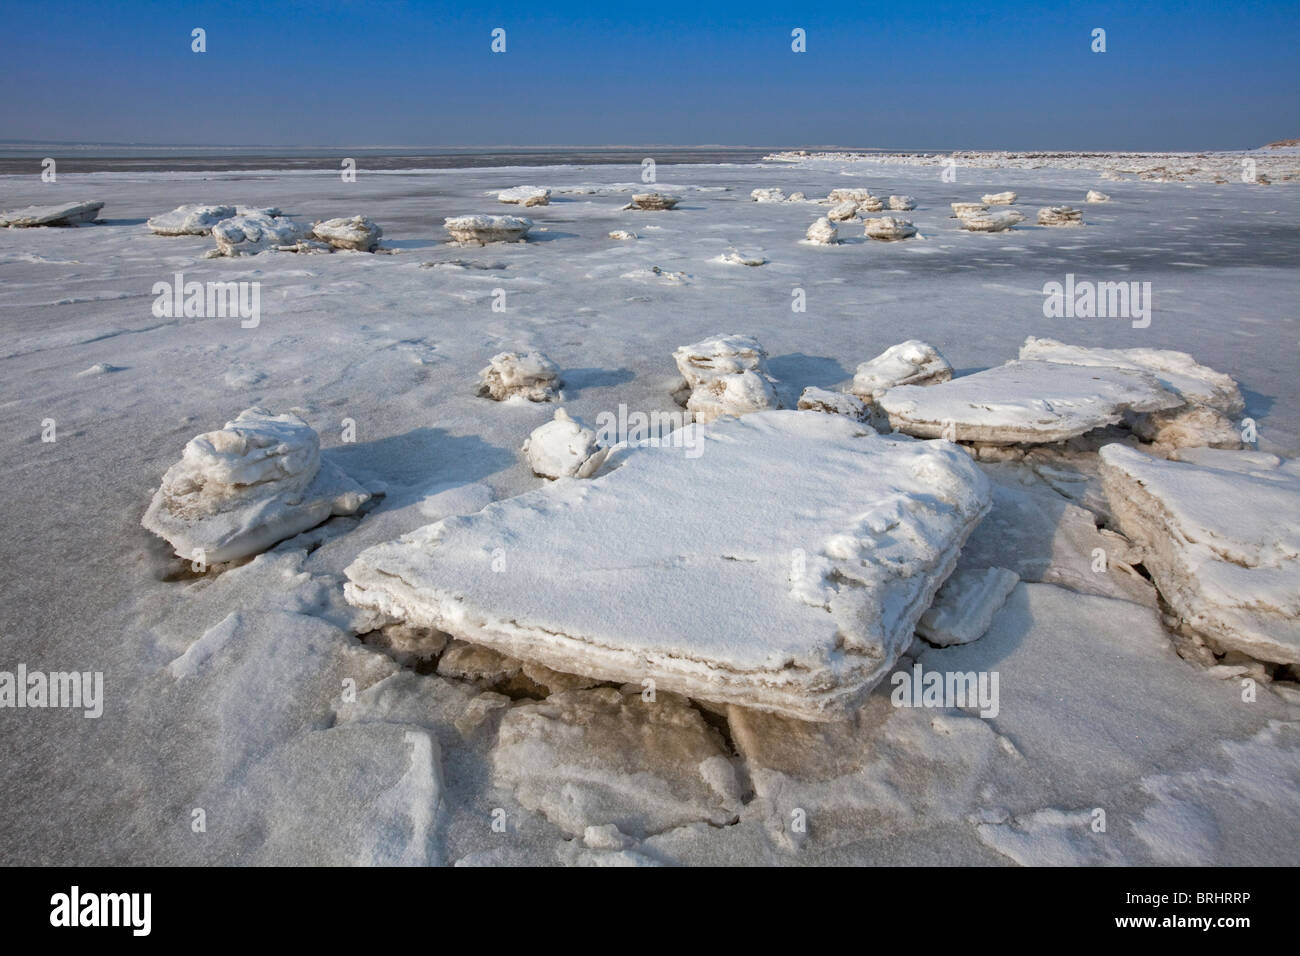 Ice floes in frozen mudflats in winter at the Wadden Sea National Park, Germany Stock Photo